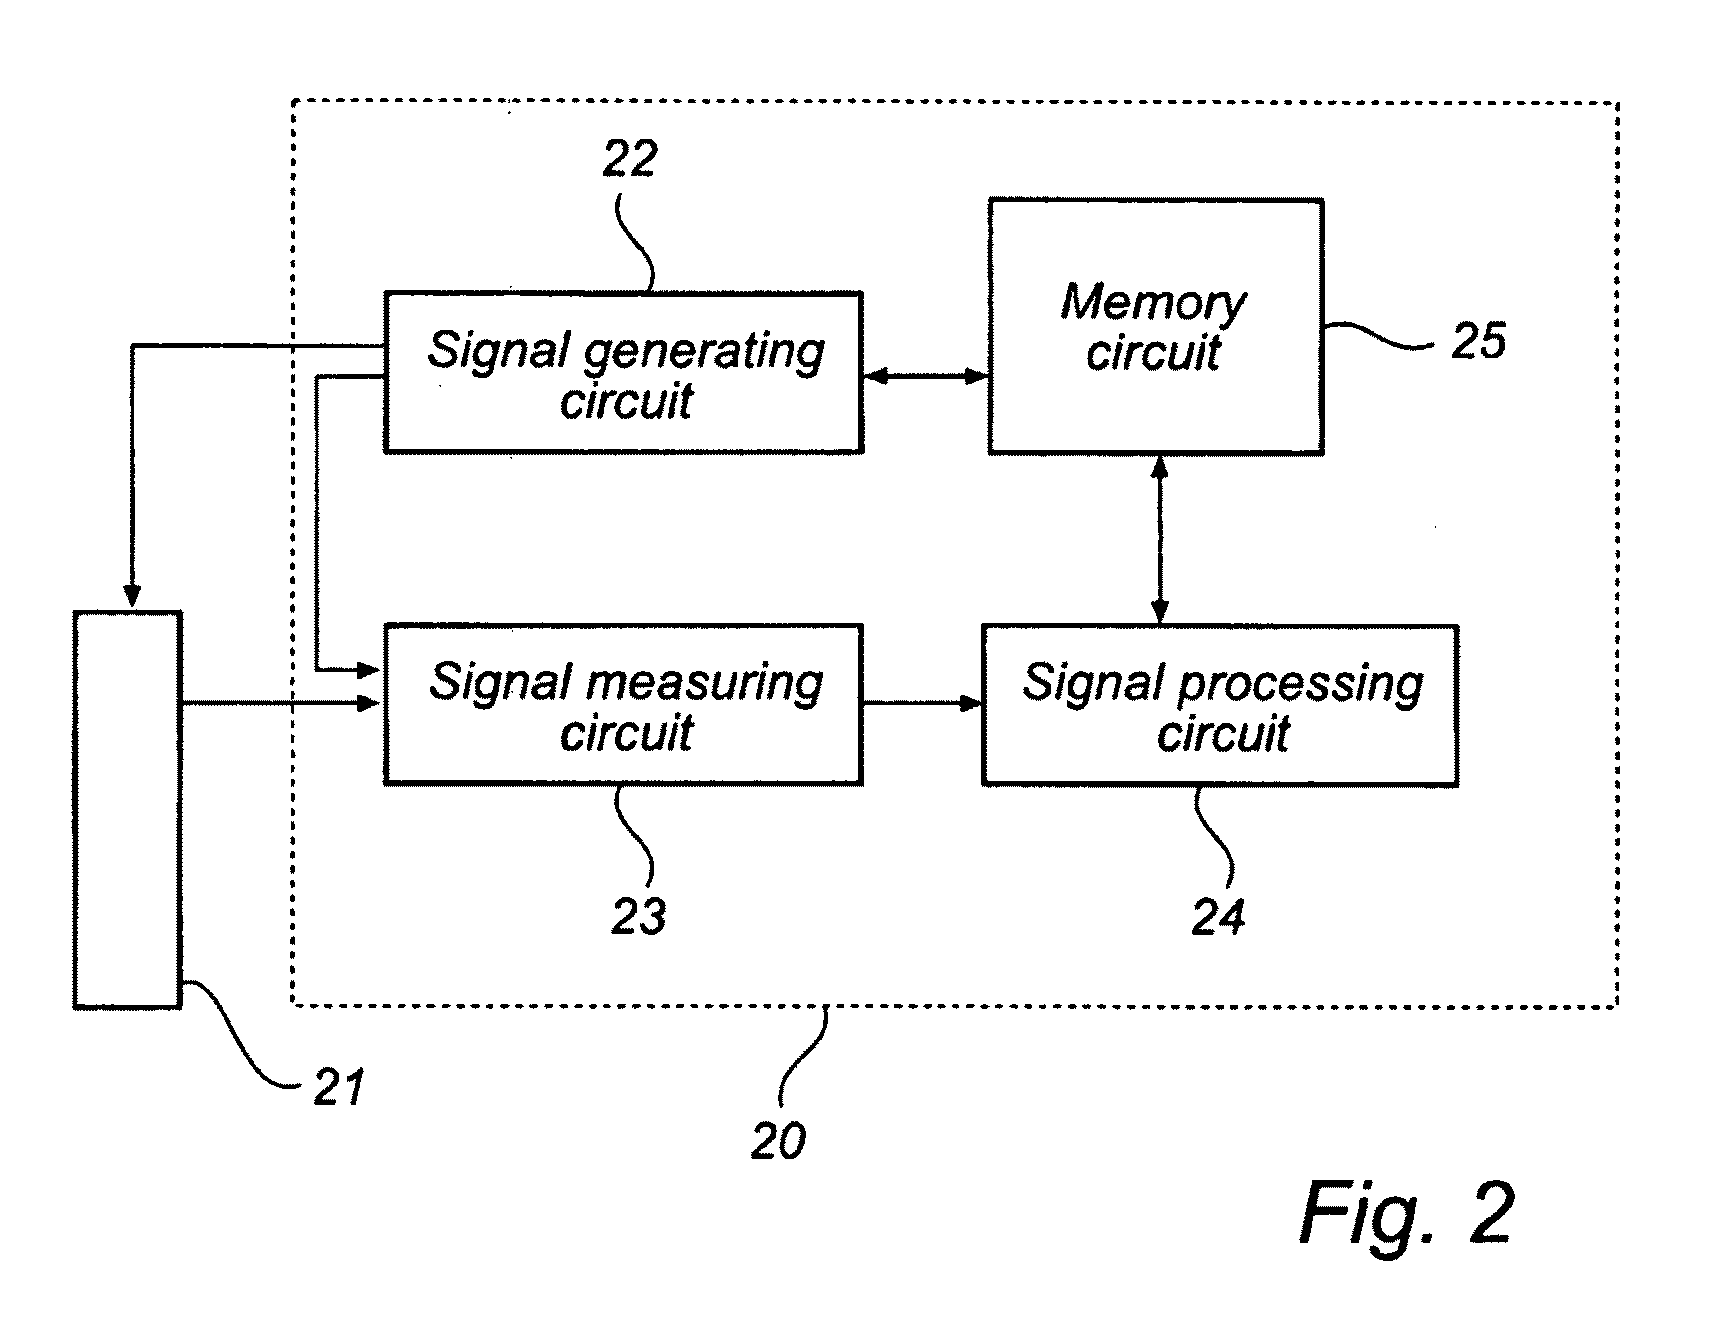 Jetting Apparatus and Method of Improving the Performance of a Jetting Apparatus